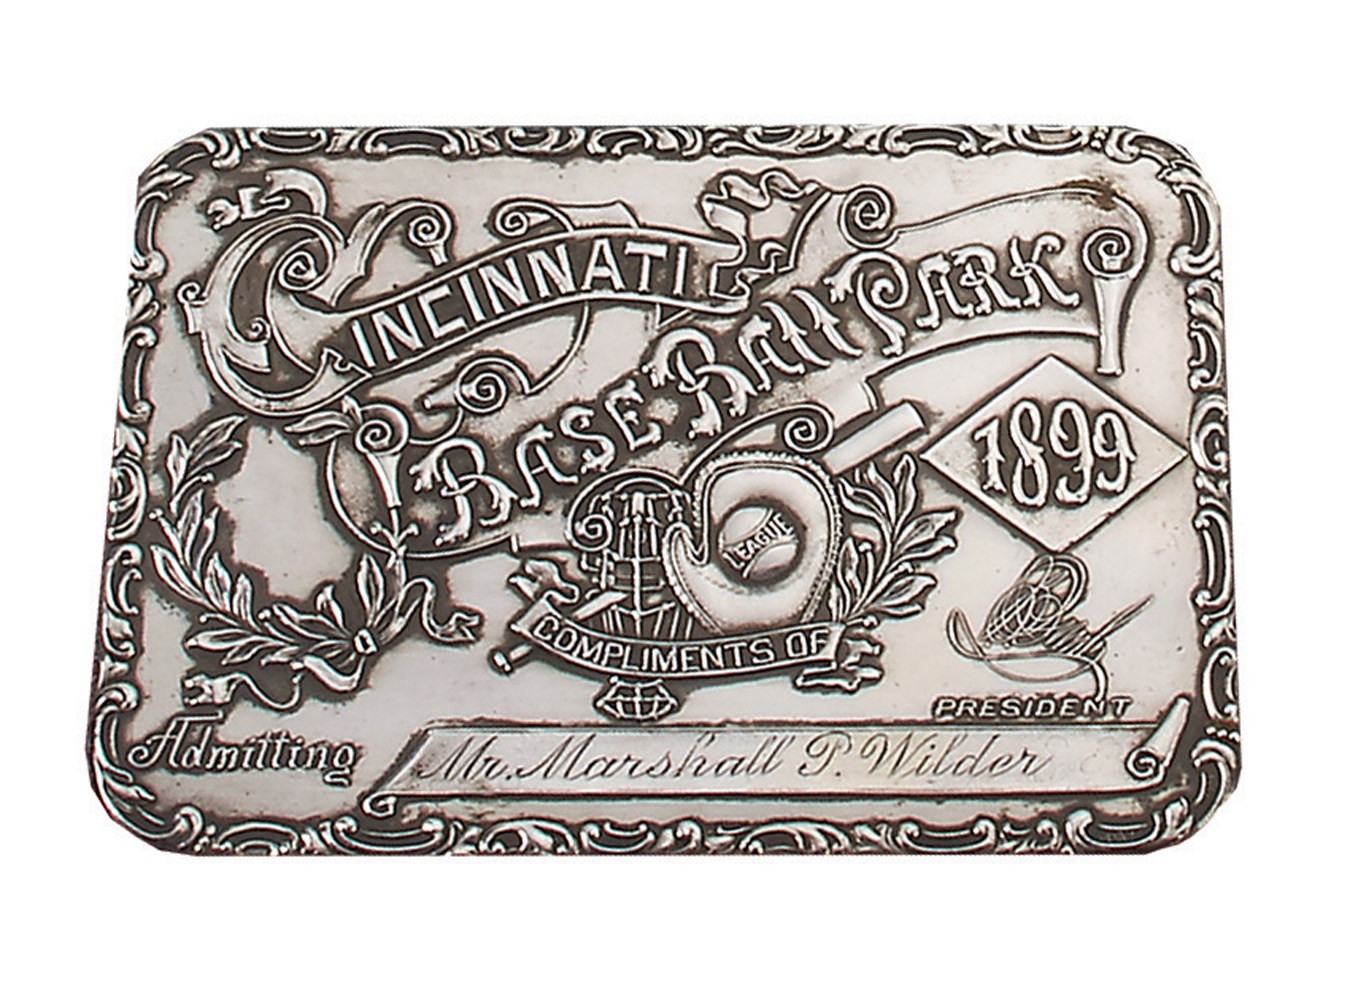 - 1899 Cincinnati Reds League Park Sterling Silver Season Pass – Presented to Groundbreaking Disabled Entertainer